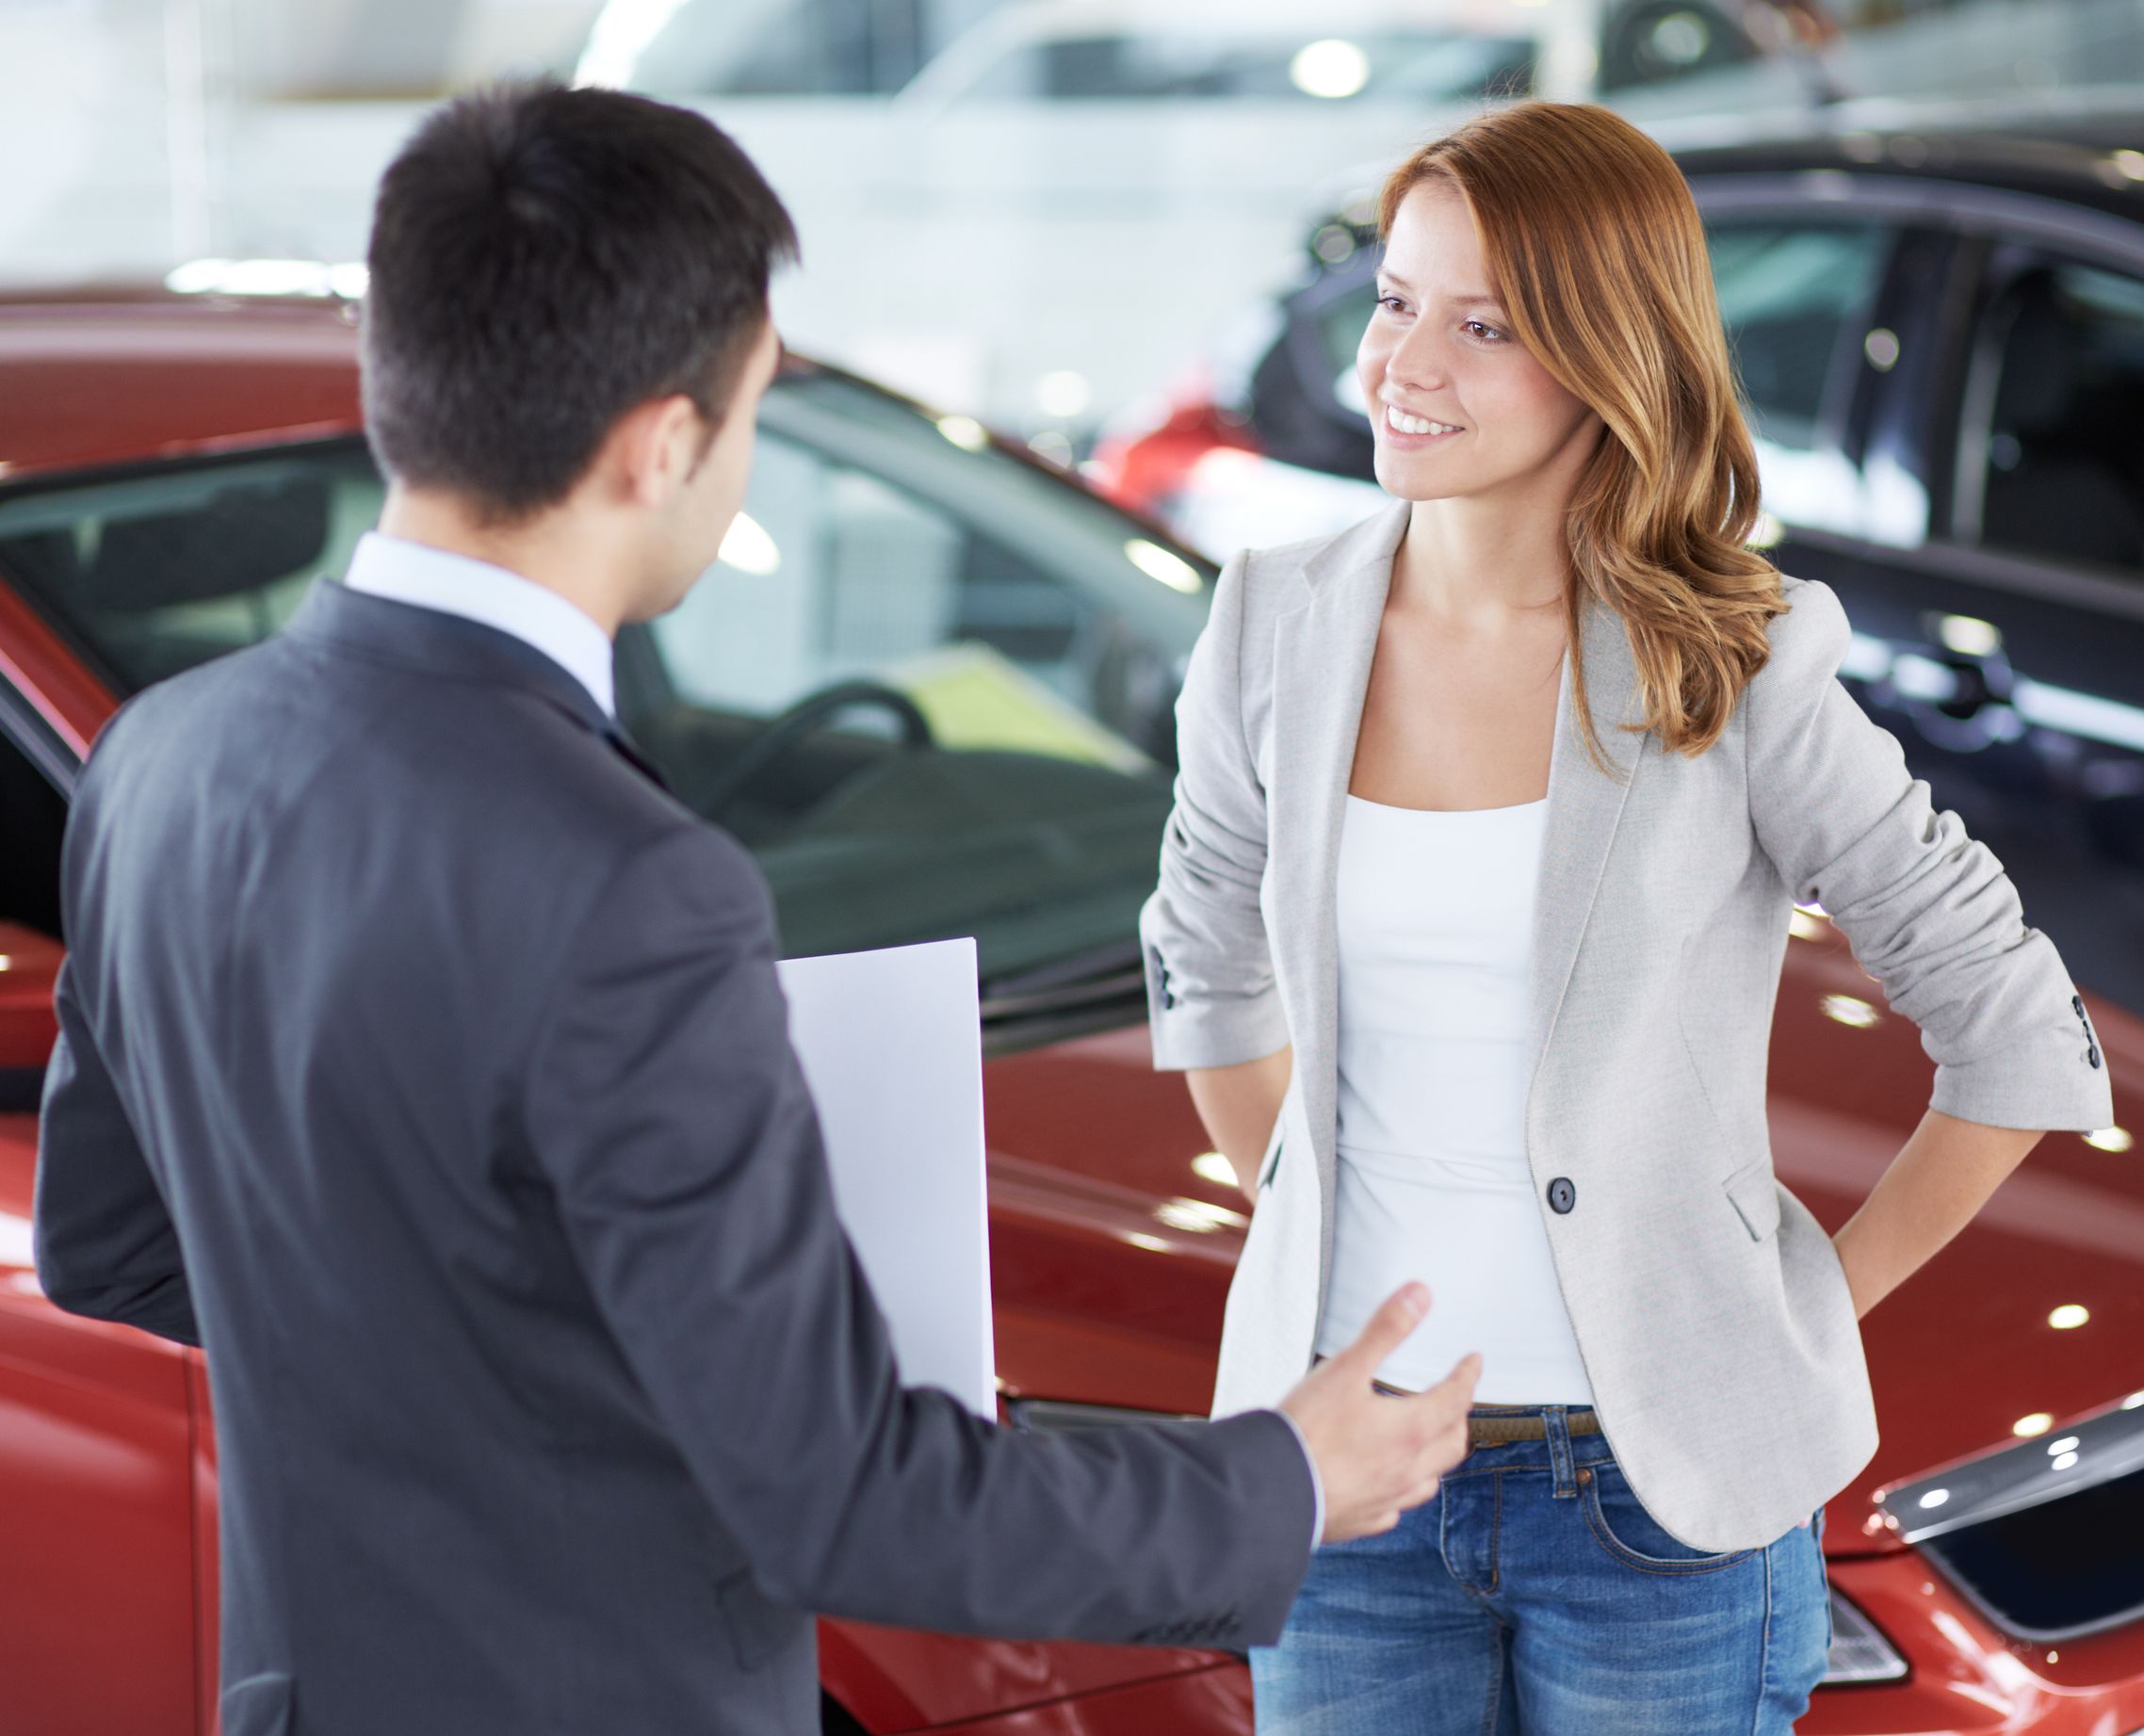 Signs of the Best Car Rental Service in Cape Coral